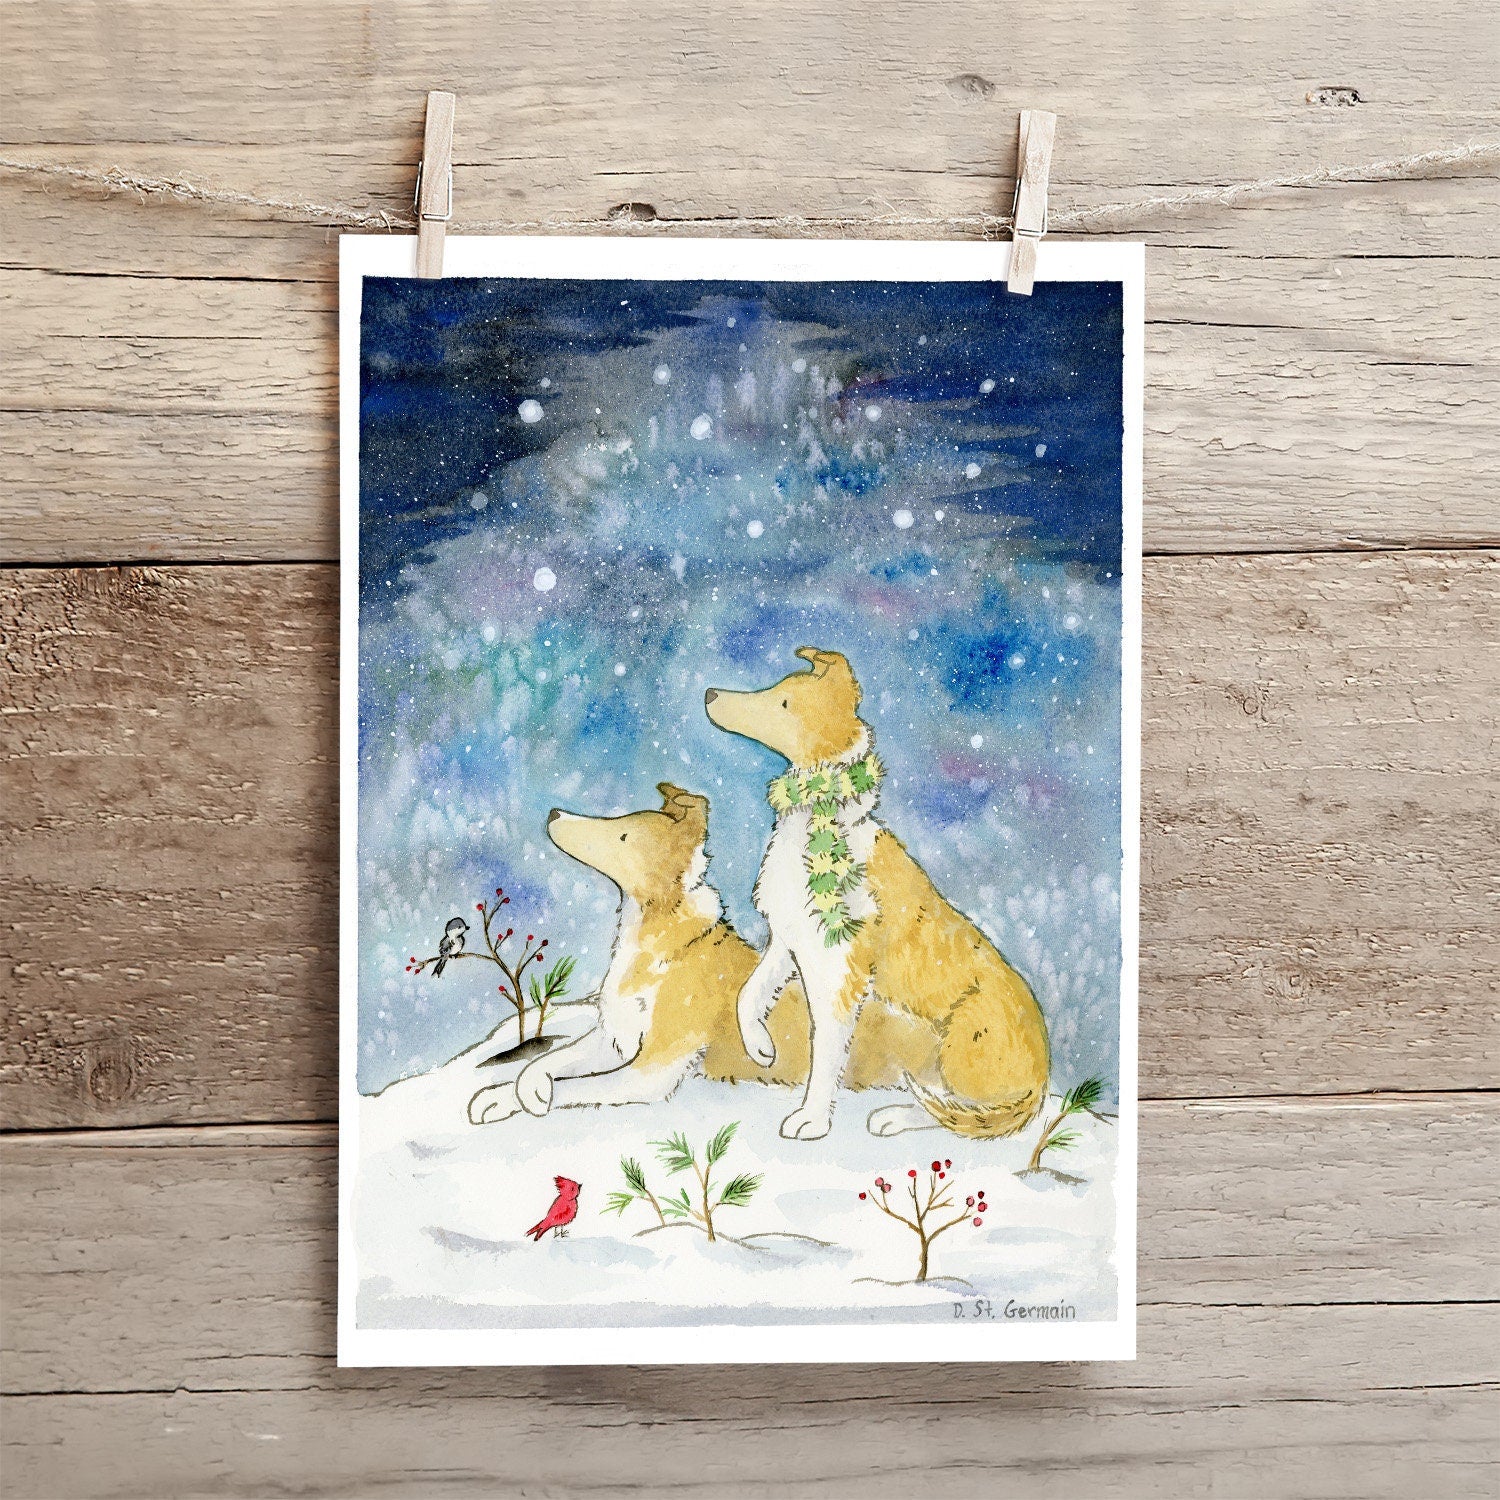 Smooth Collie Art, Collie Watercolor Print, Collies and the Starry Sky